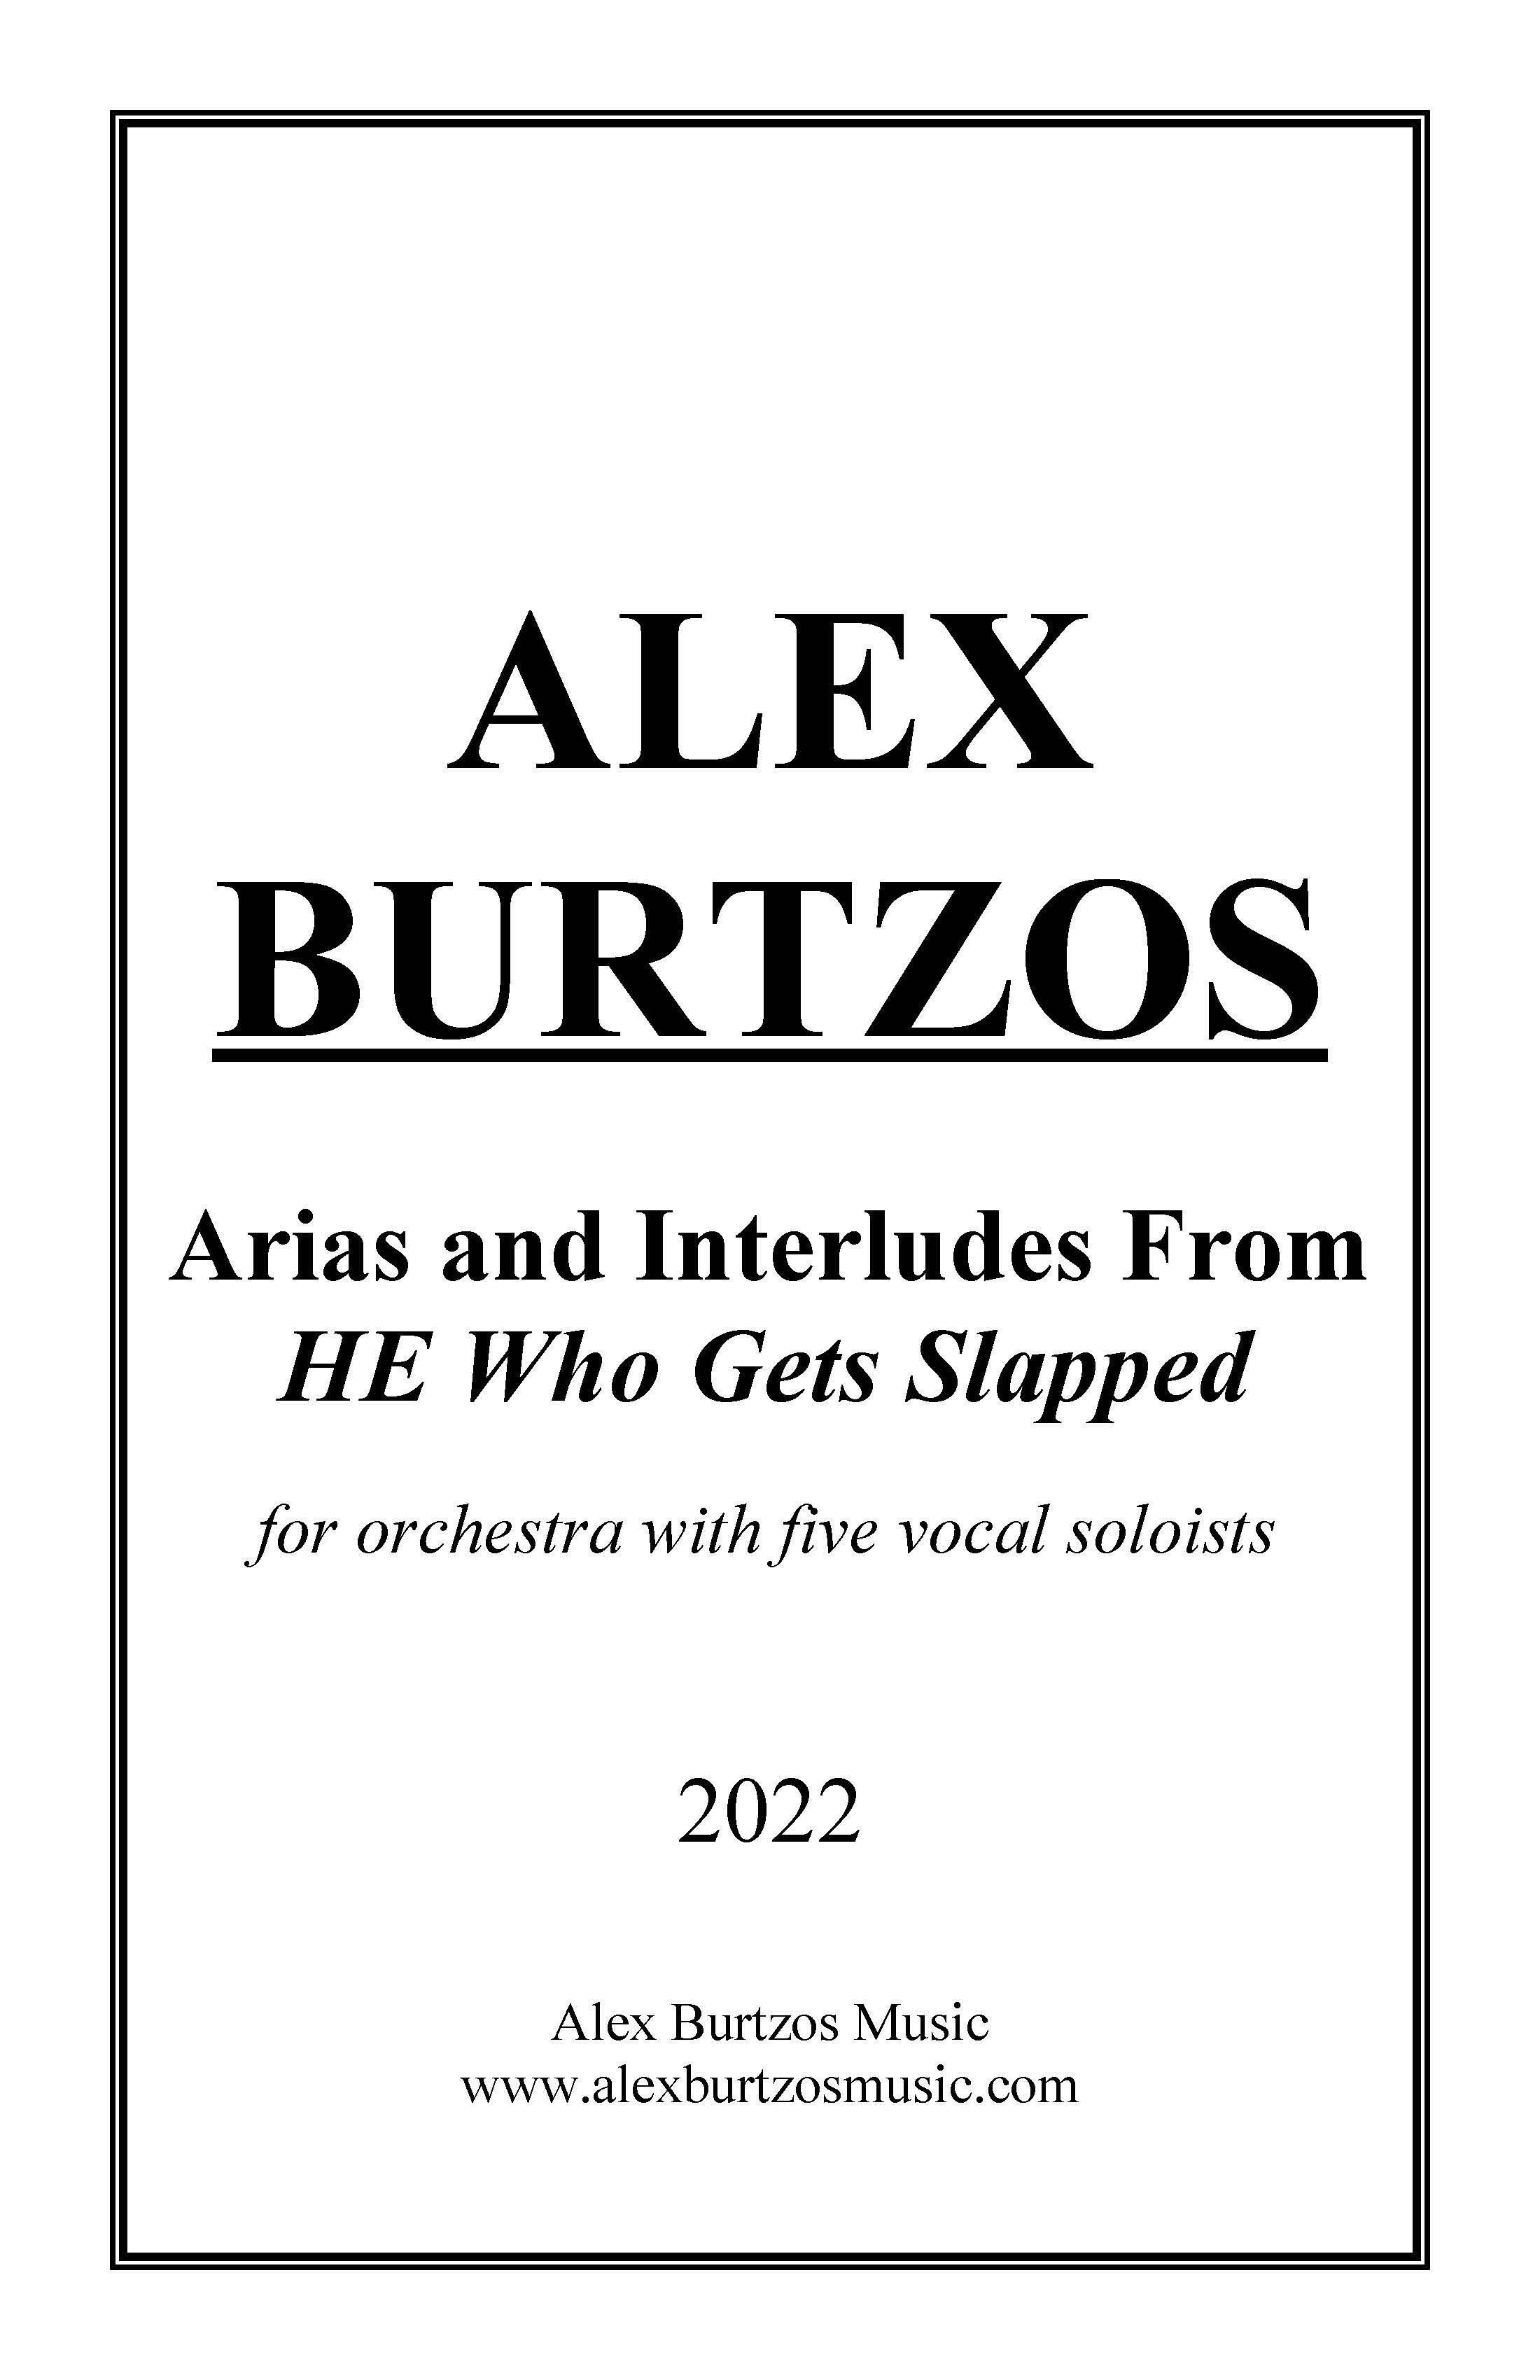 Arias and Interludes from HWGS - Complete Score_Page_01.jpg